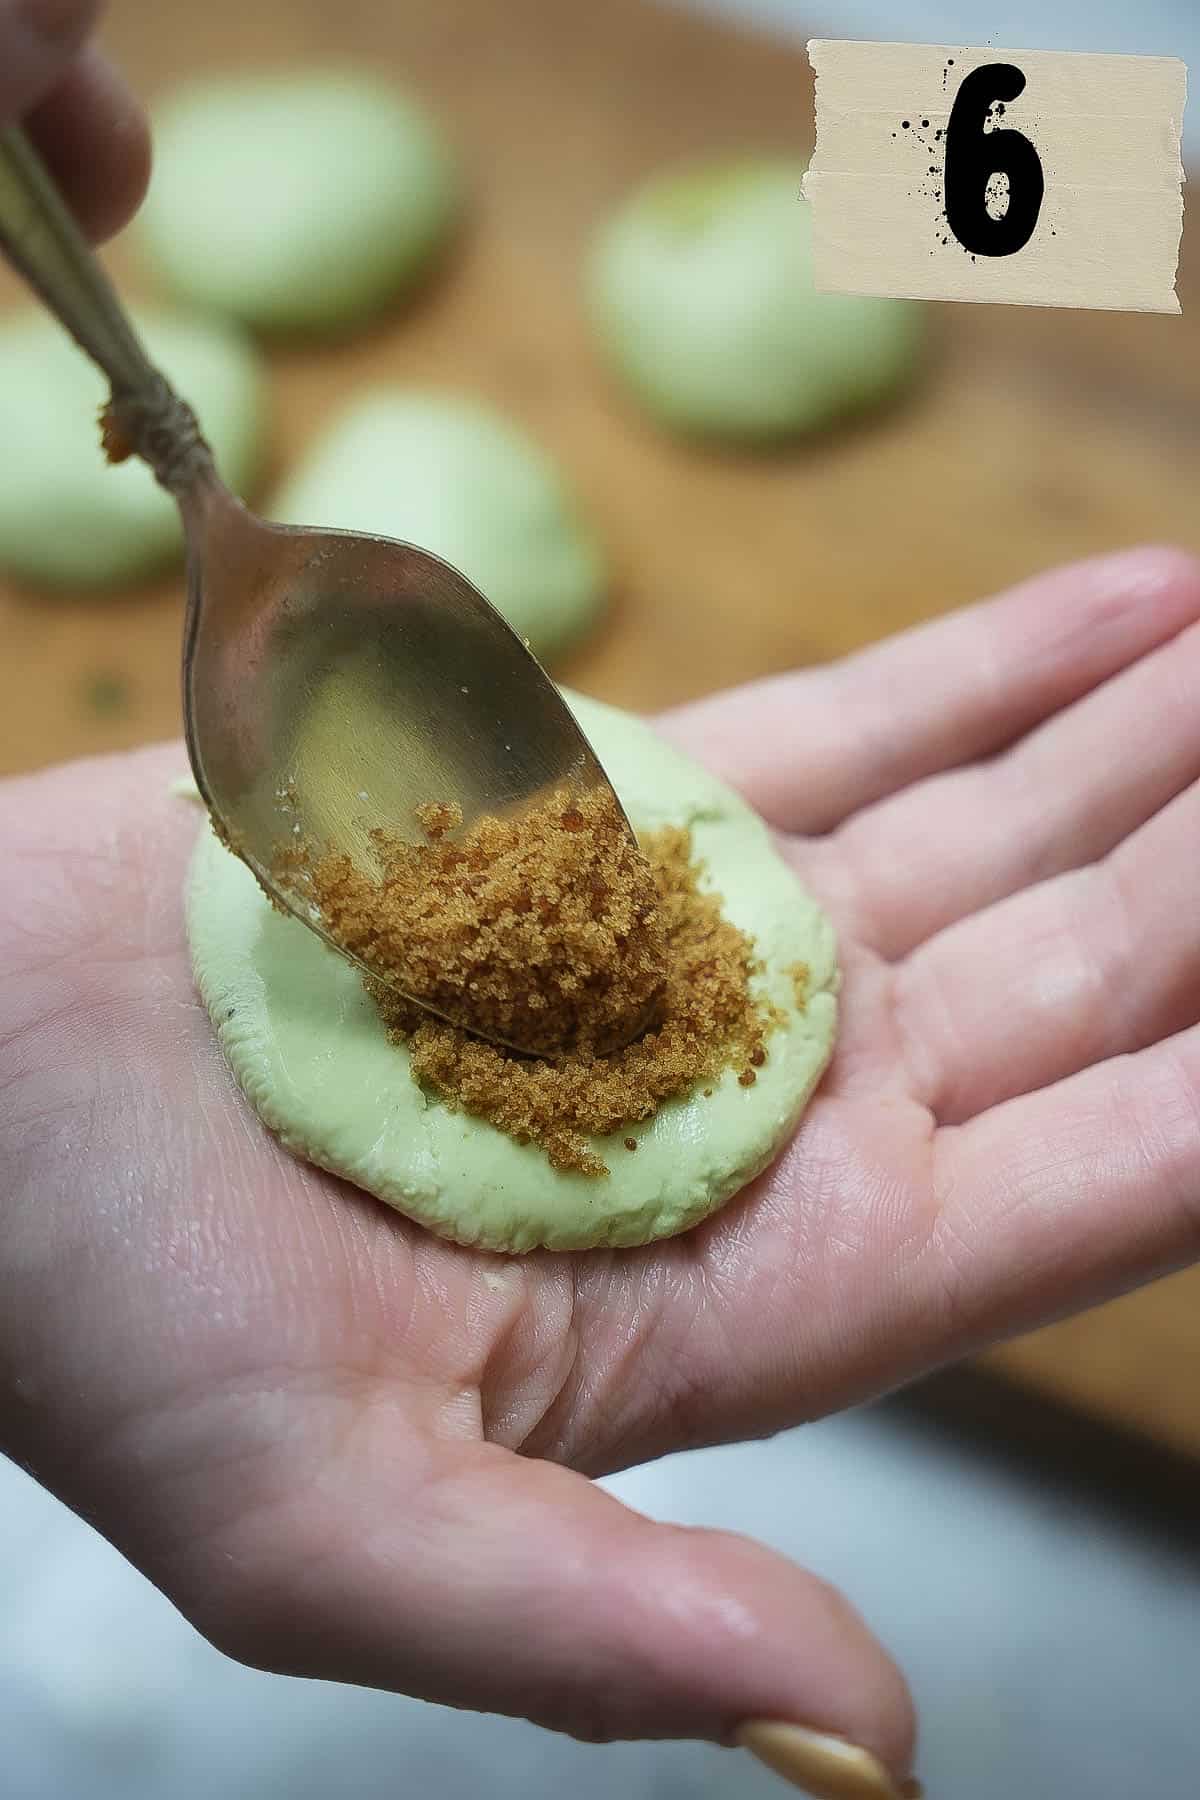 A person is holding a spoon with palm sugar, adding it to a flattened portion of pandan dough in their other hand.